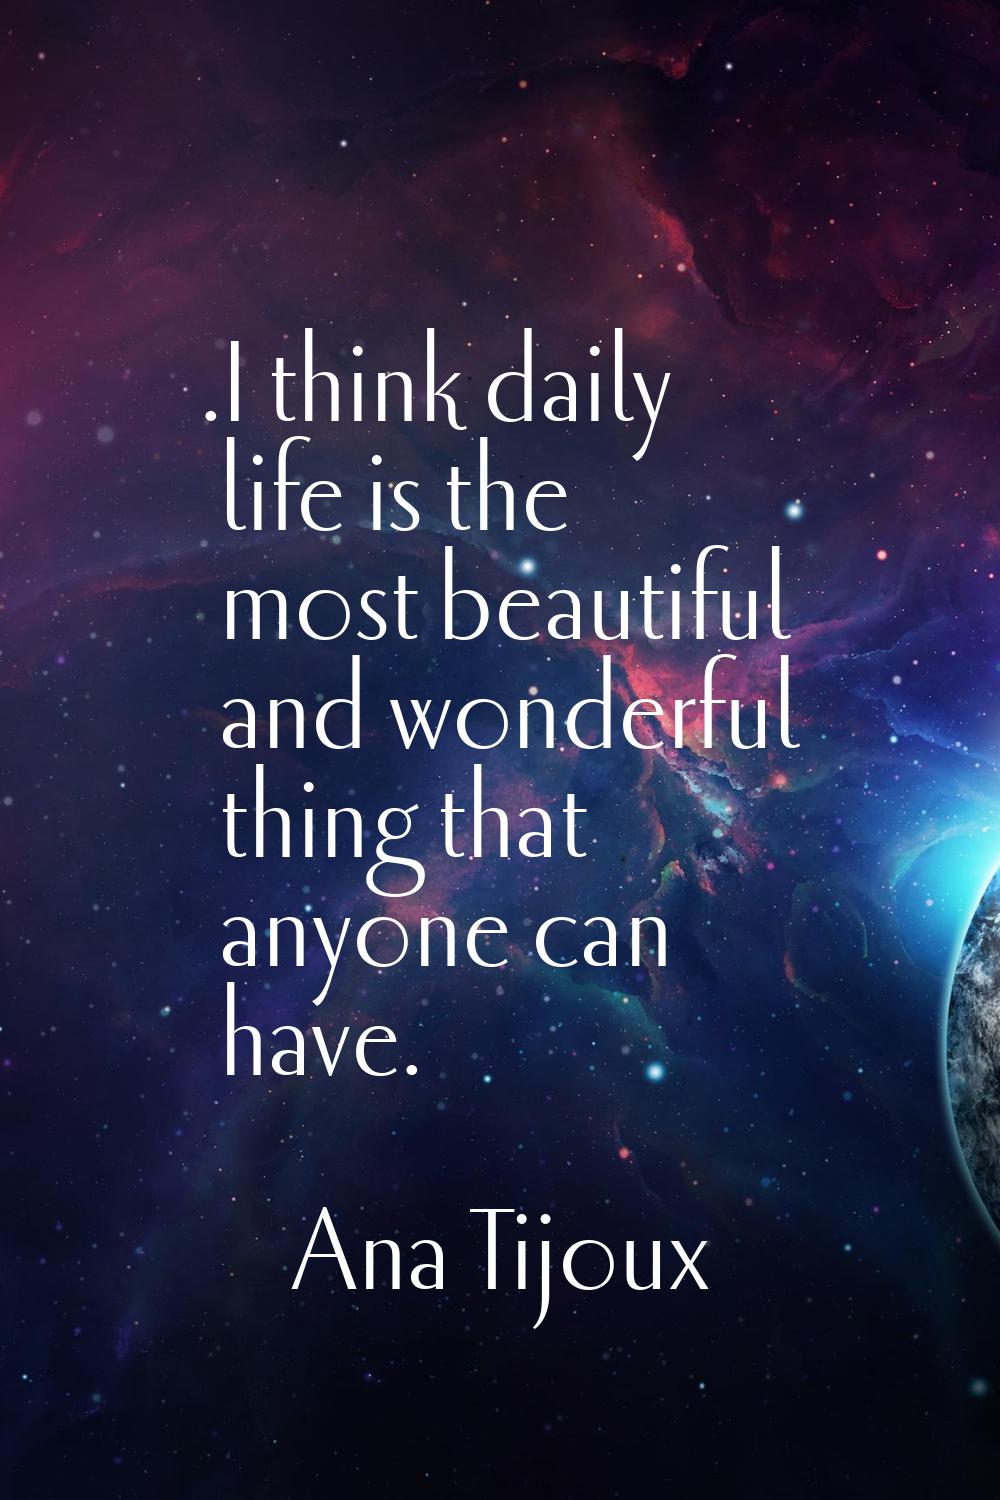 .I think daily life is the most beautiful and wonderful thing that anyone can have.